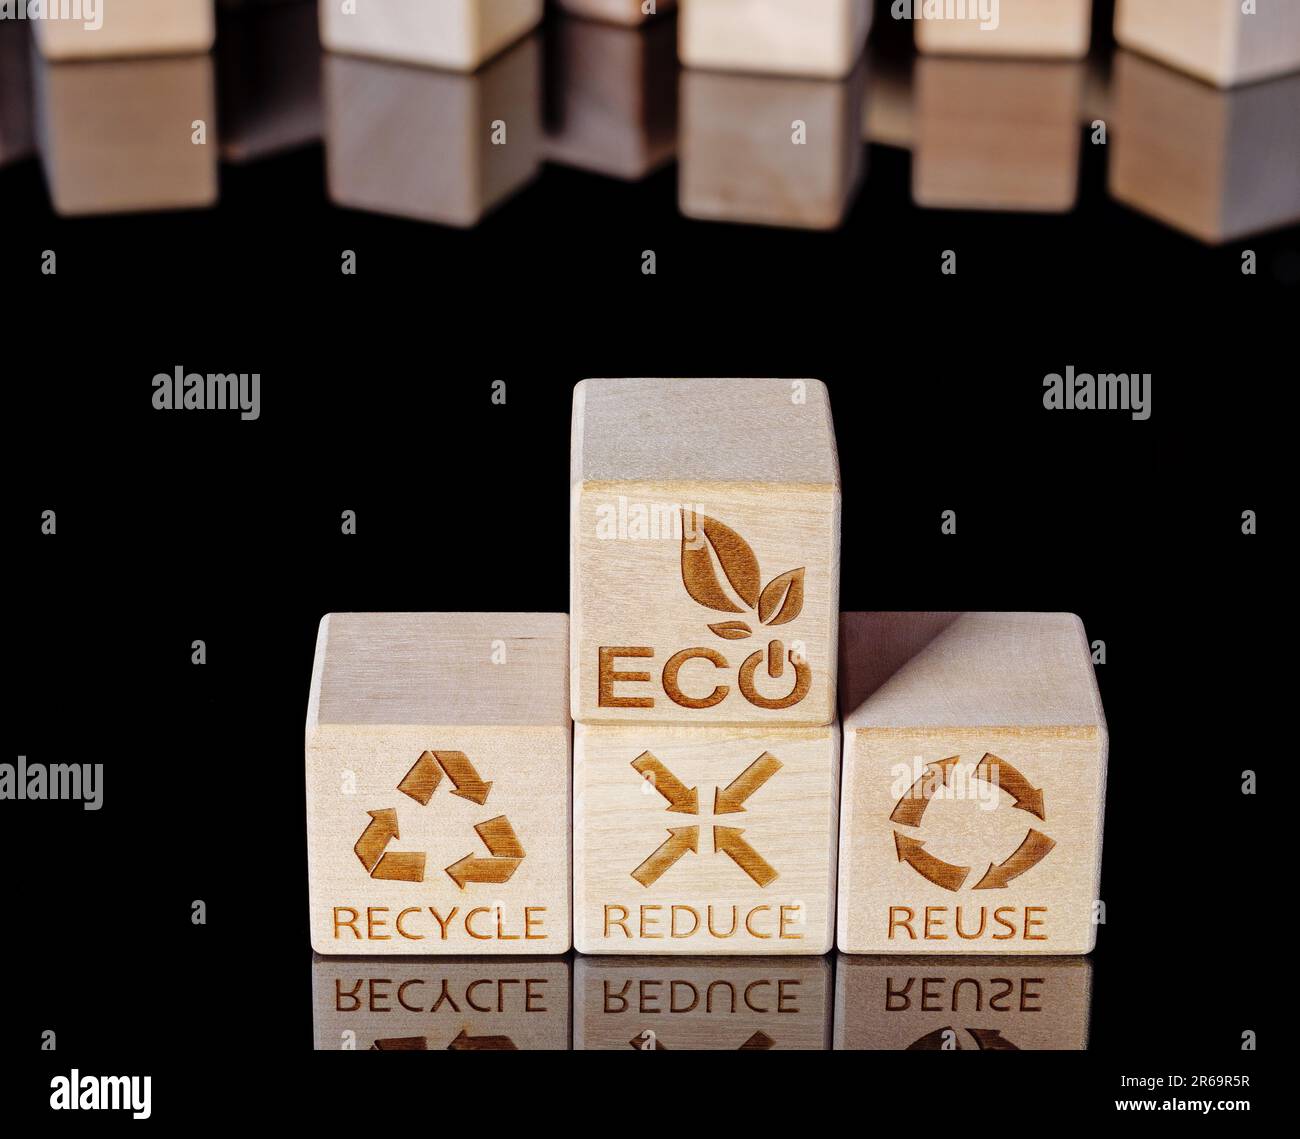 Reduce, Reuse, and Recycle symbols as a environmental-oriented business concept Stock Photo